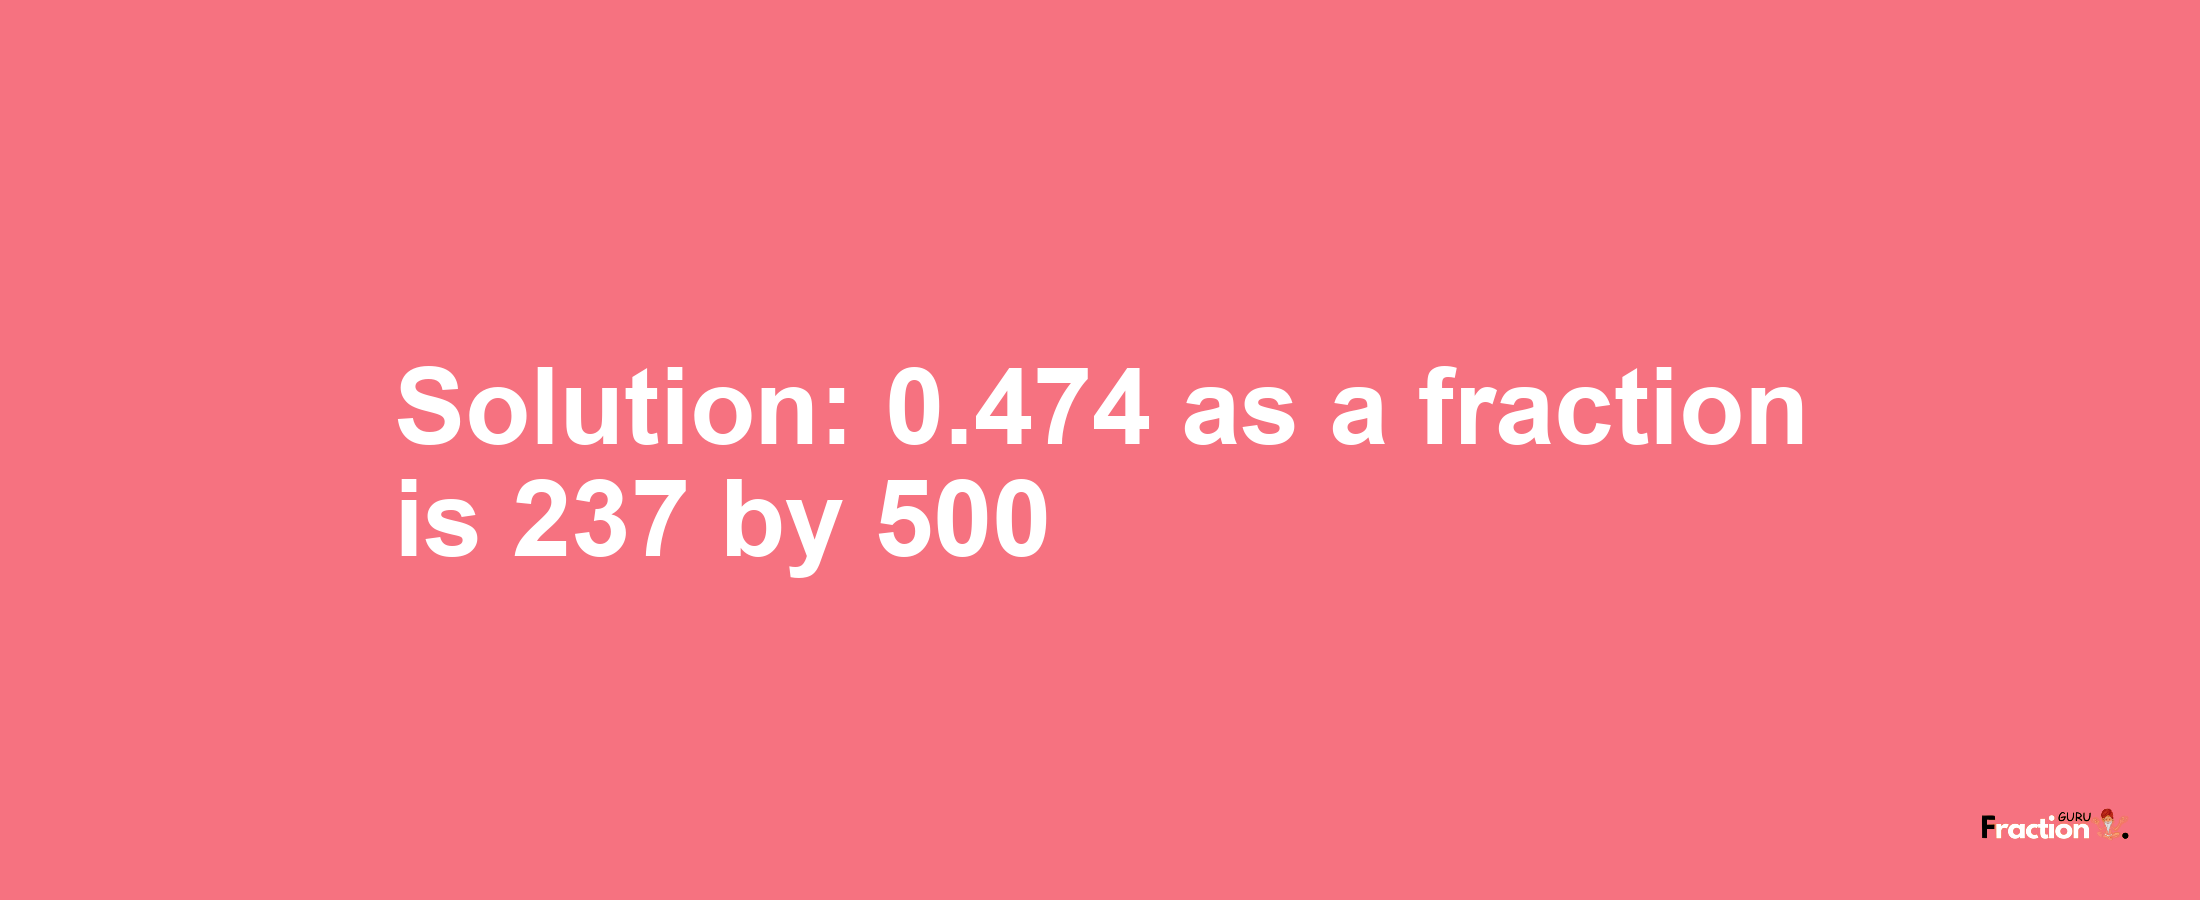 Solution:0.474 as a fraction is 237/500